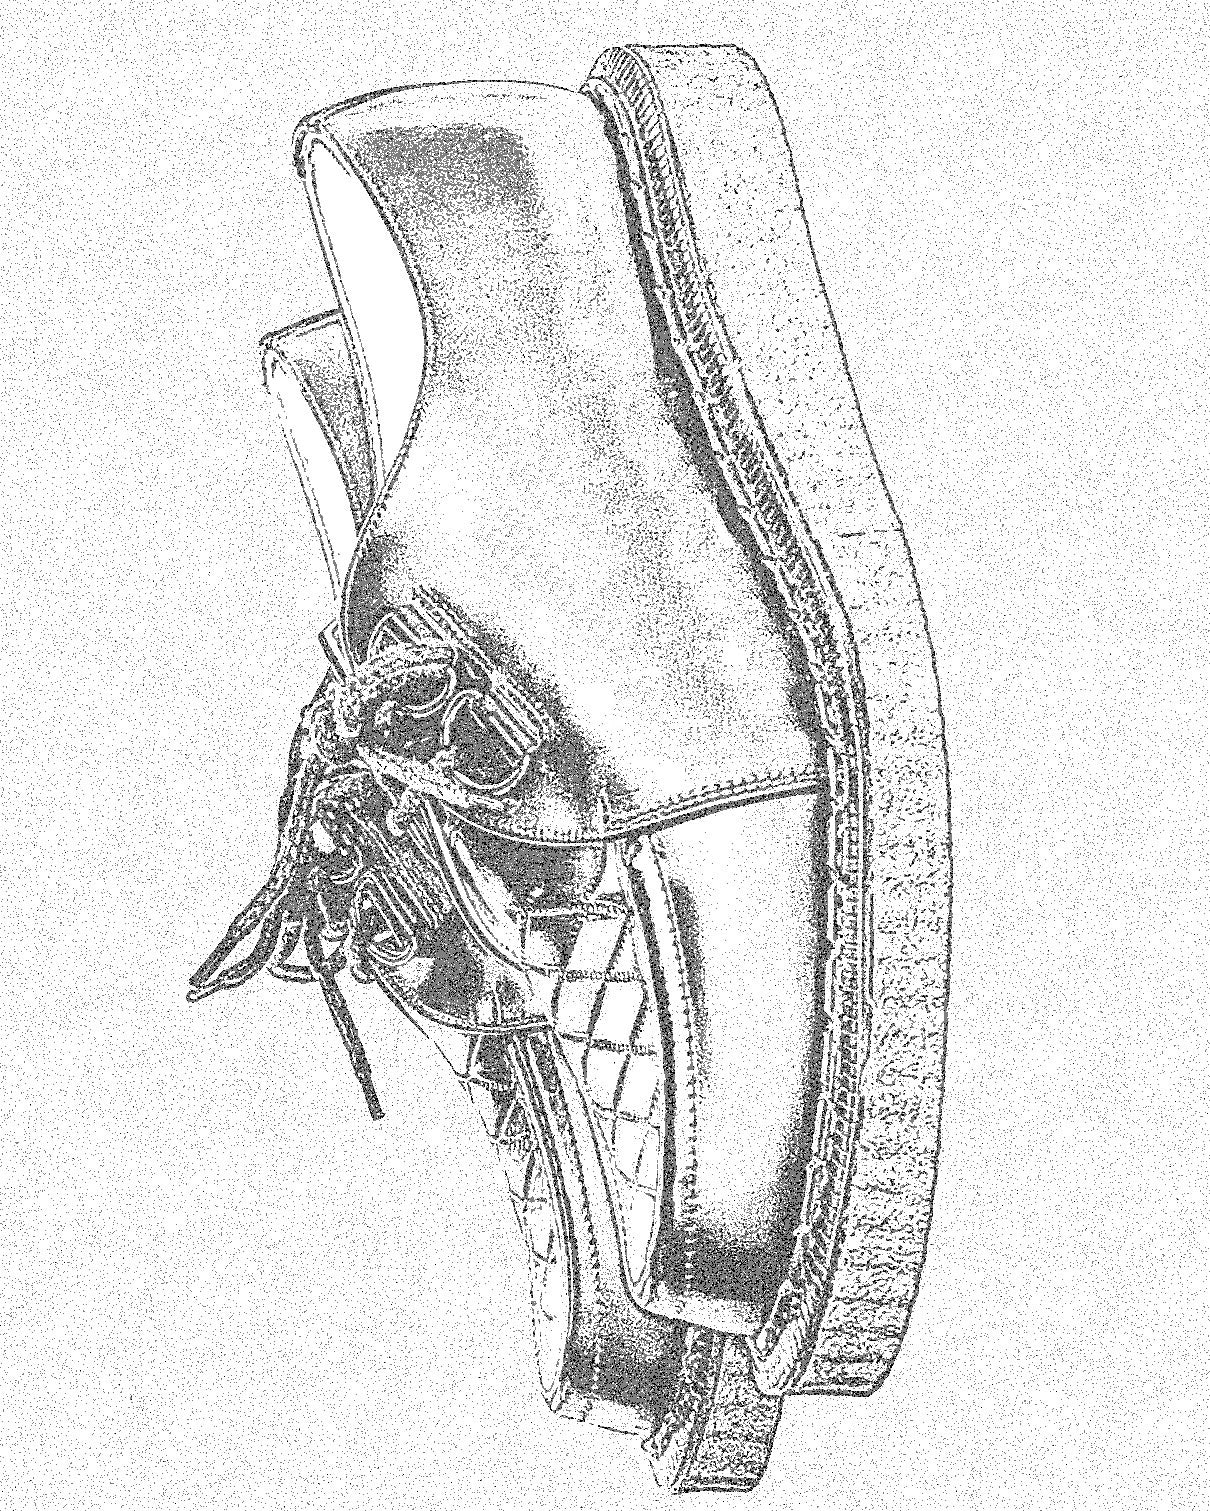 Outline drawing of a Bingley shoe